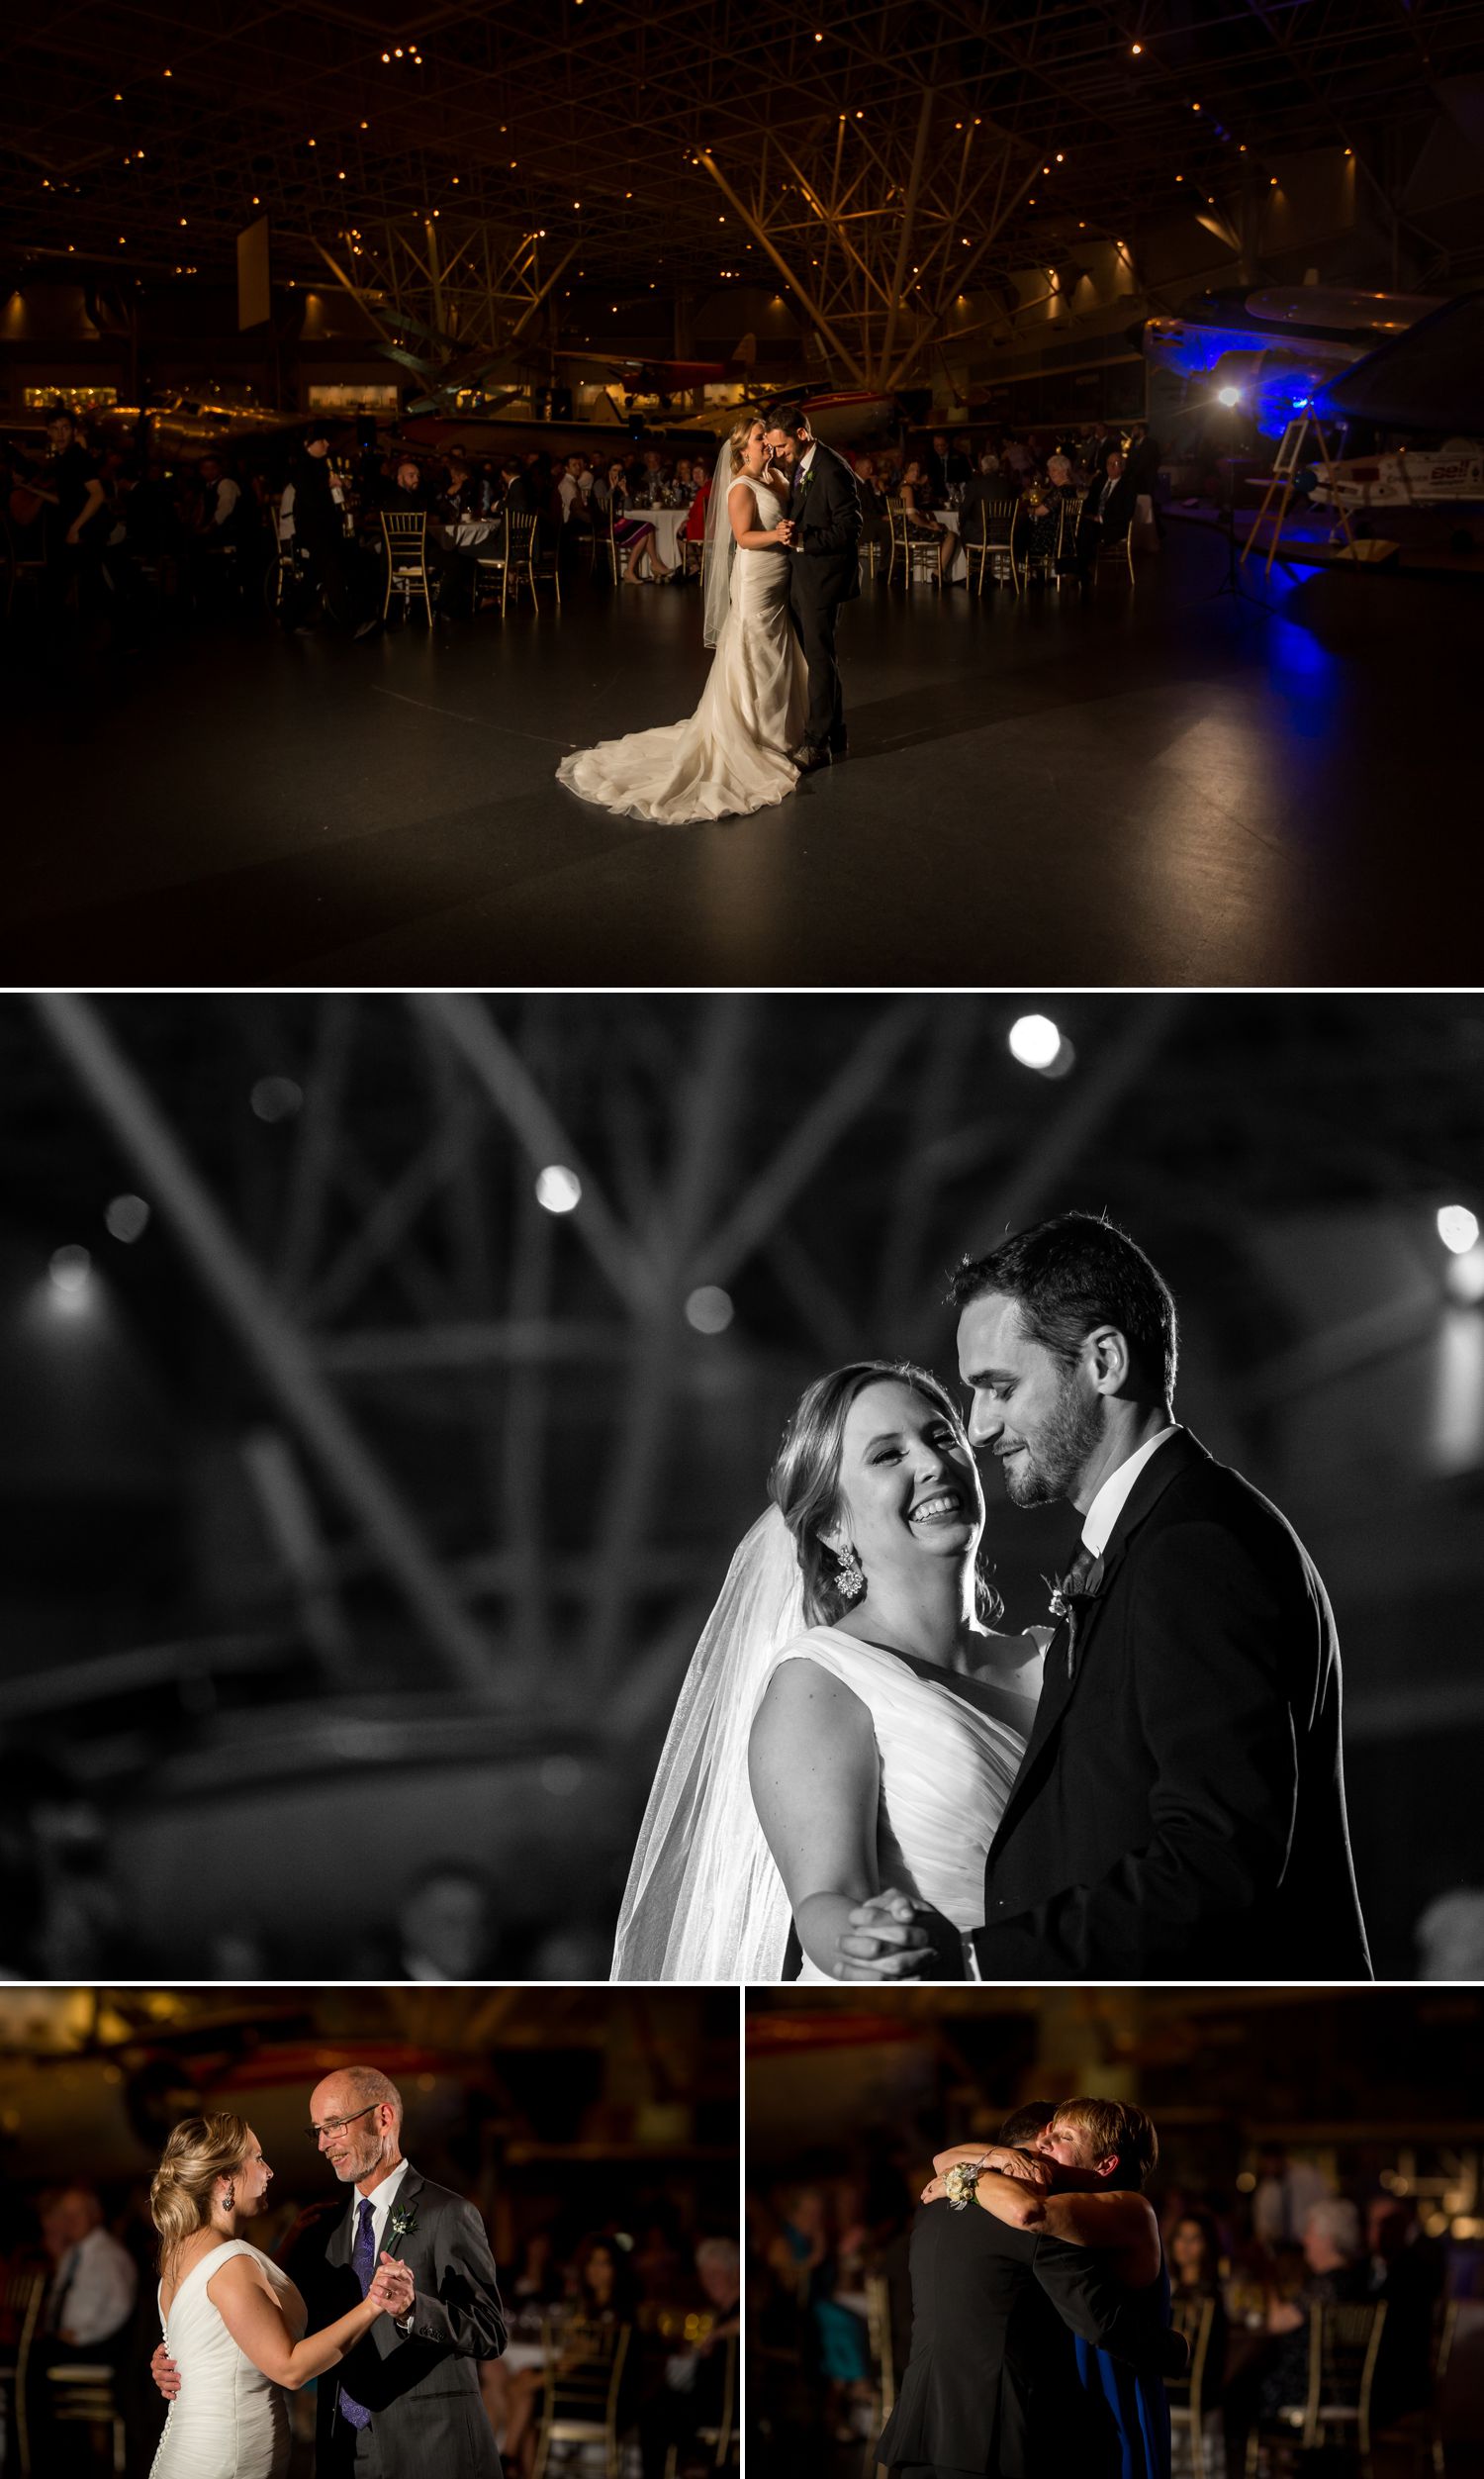 The bride and groom during their first dances at their wedding reception inside the Canadian Aviation and Space Museum in downtown Ottawa